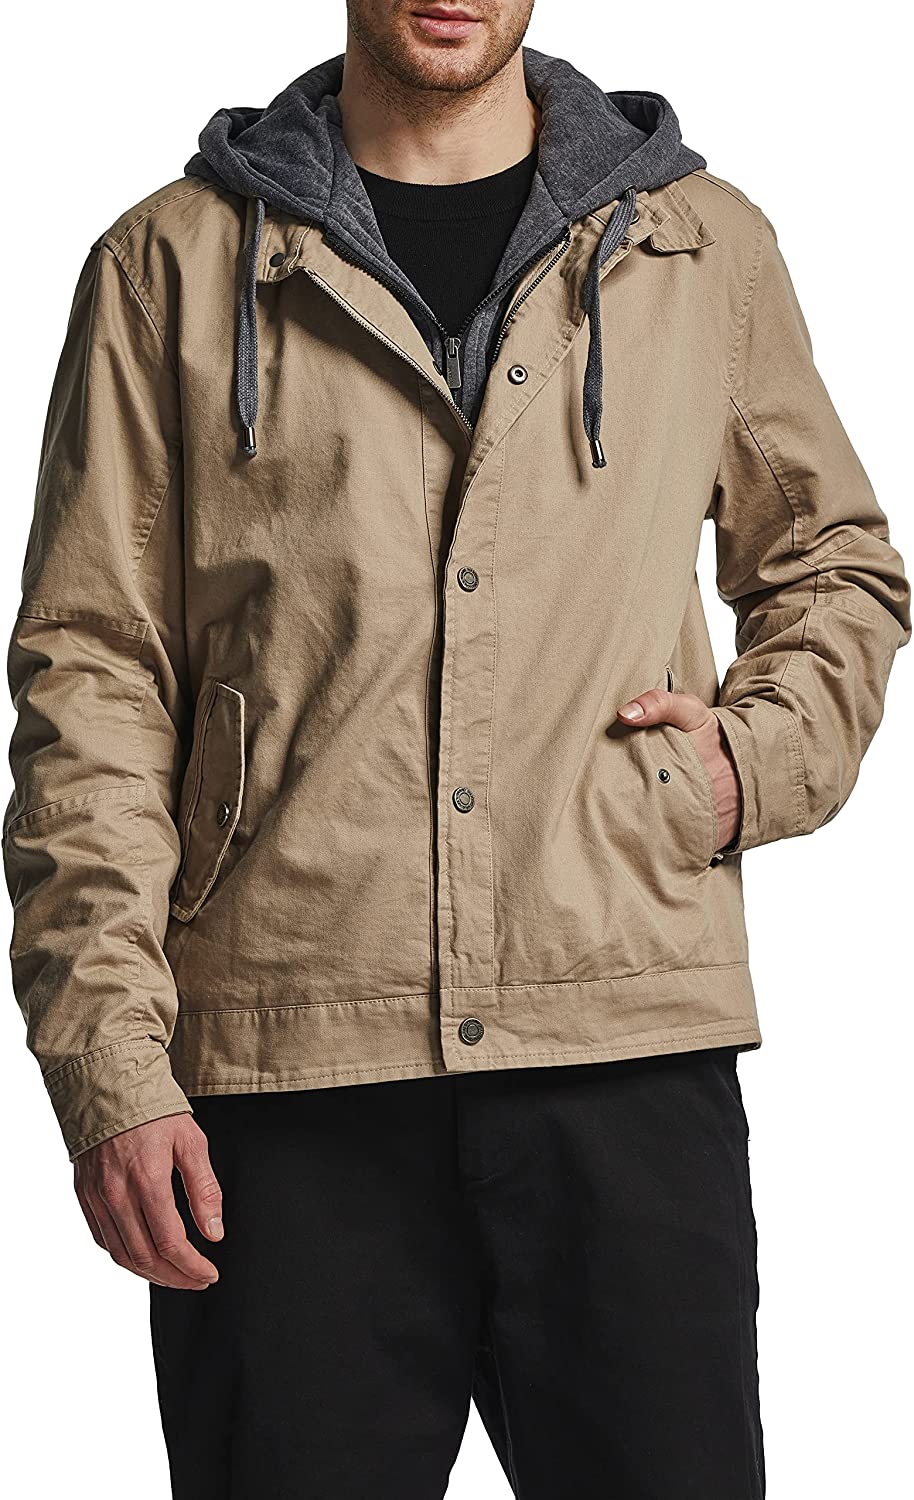 Wantdo Mens Warm Casual Military Jacket with Removable Hood 